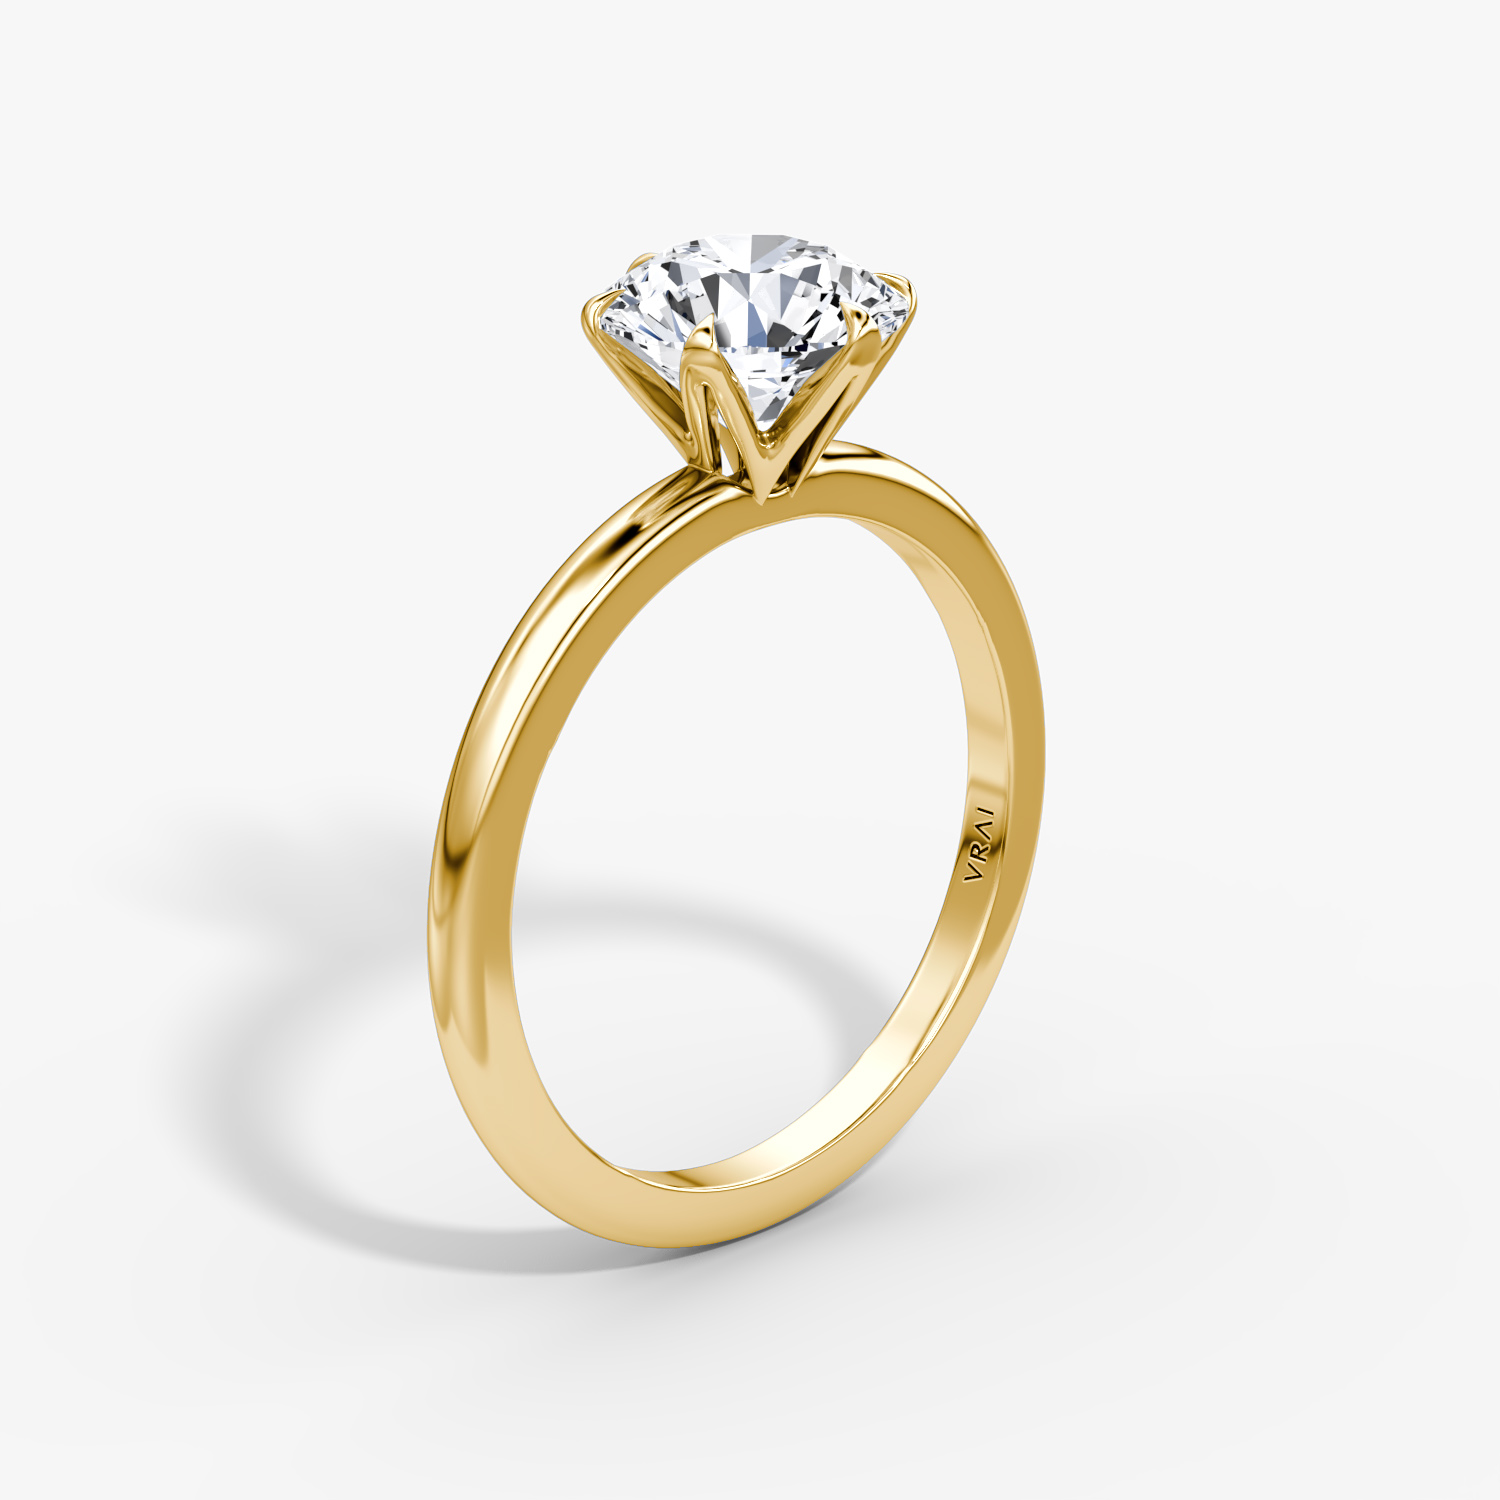 Shop All Engagement Rings Styles and Settings